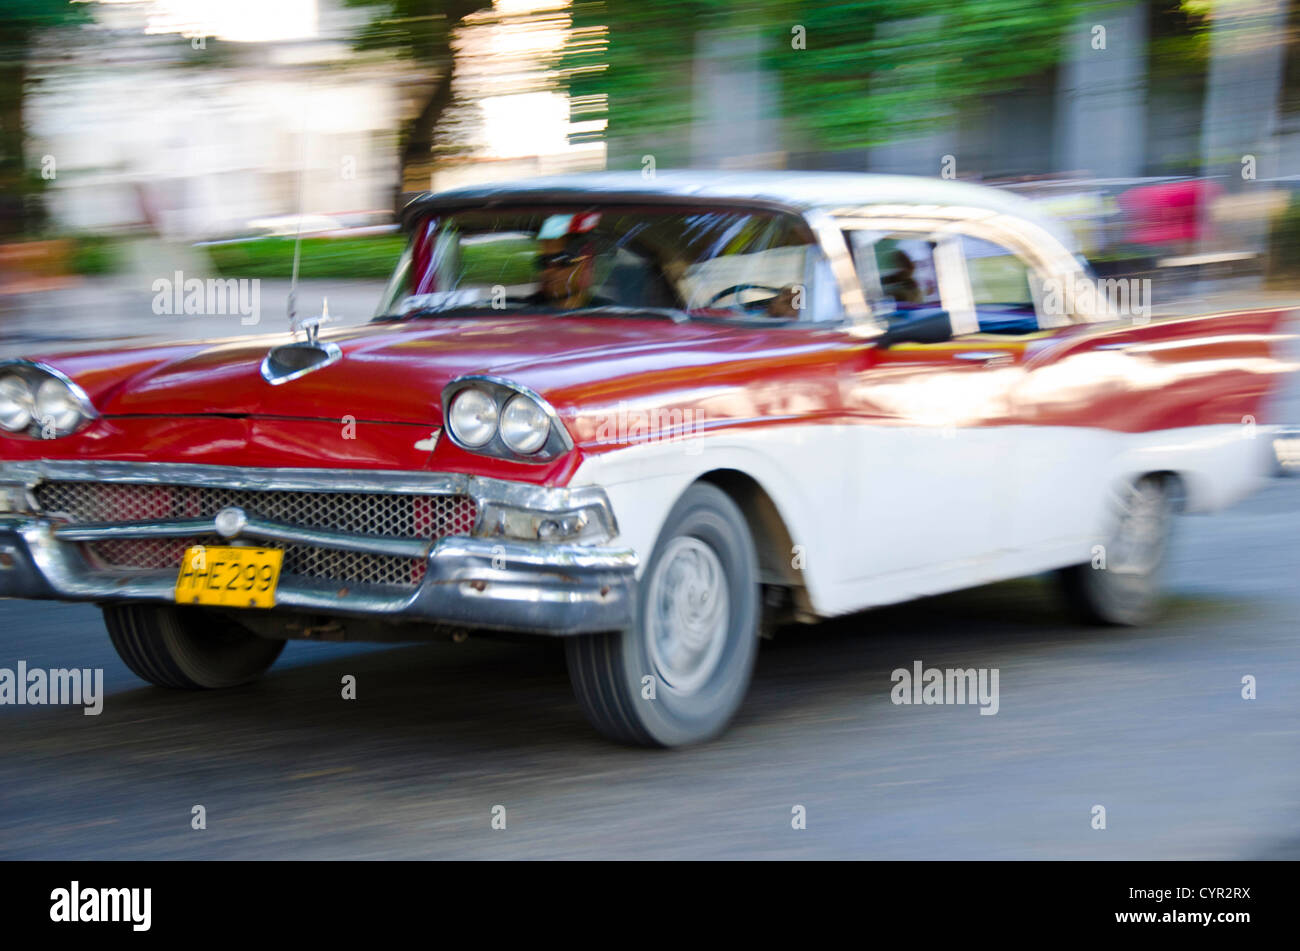 Antique Chevy from the 50's in Havana, Cuba Stock Photo